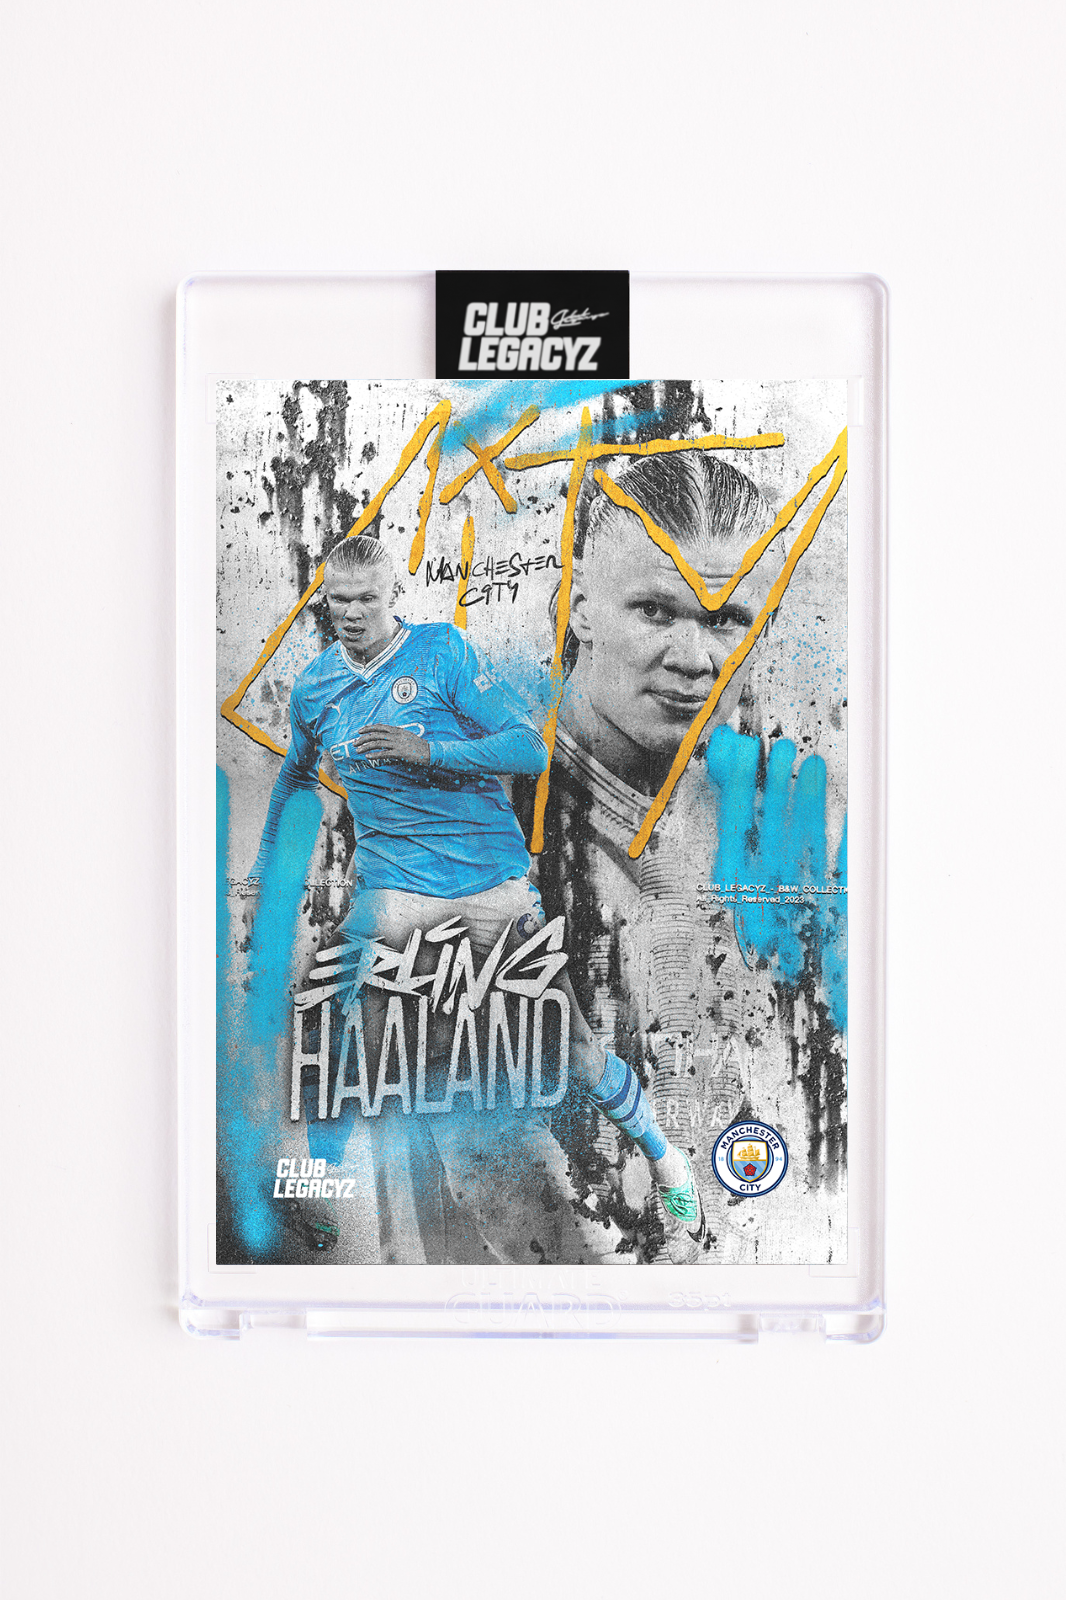 Manchester City - Icon Black & White Erling Haaland 100 exemplaires